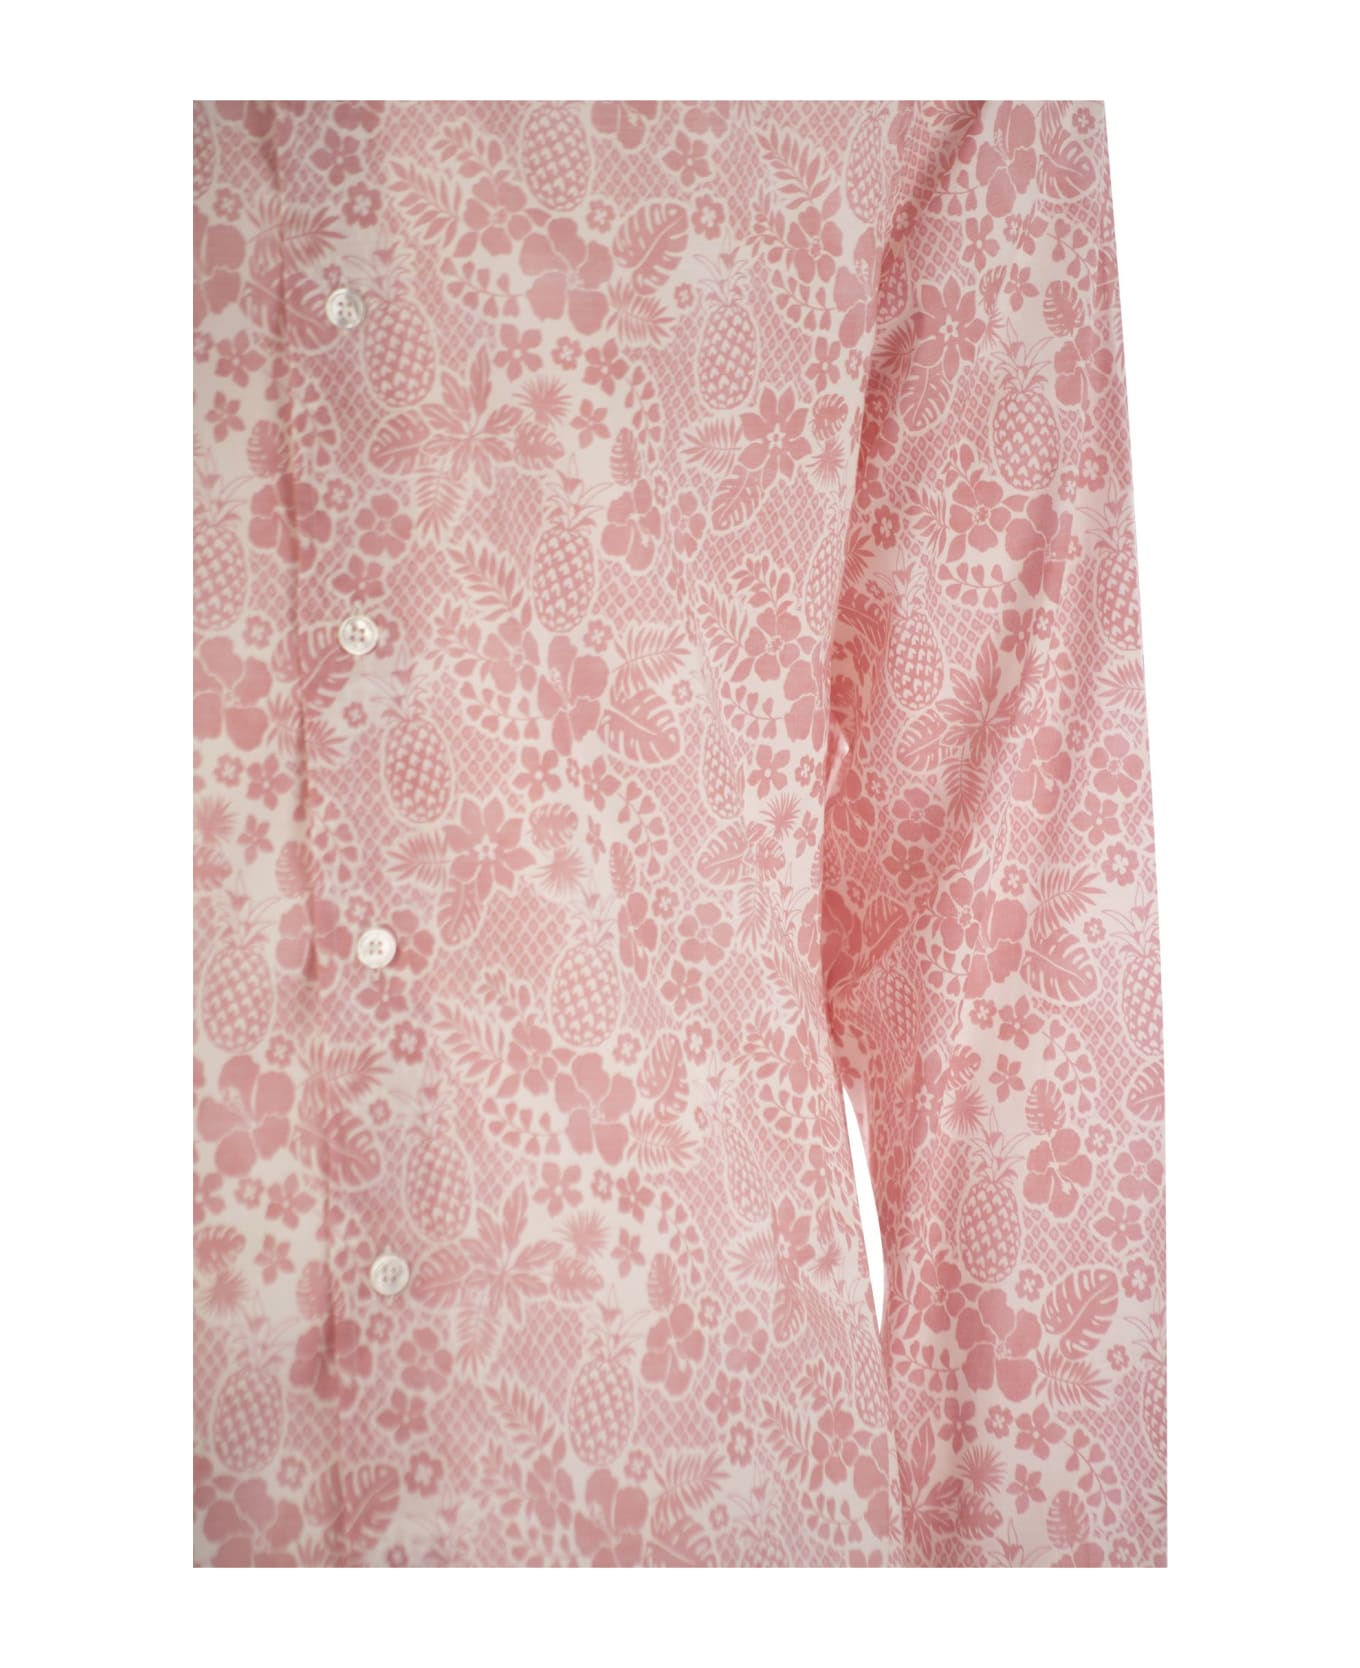 Fedeli Printed Stretch Cotton Voile Shirt - Pink